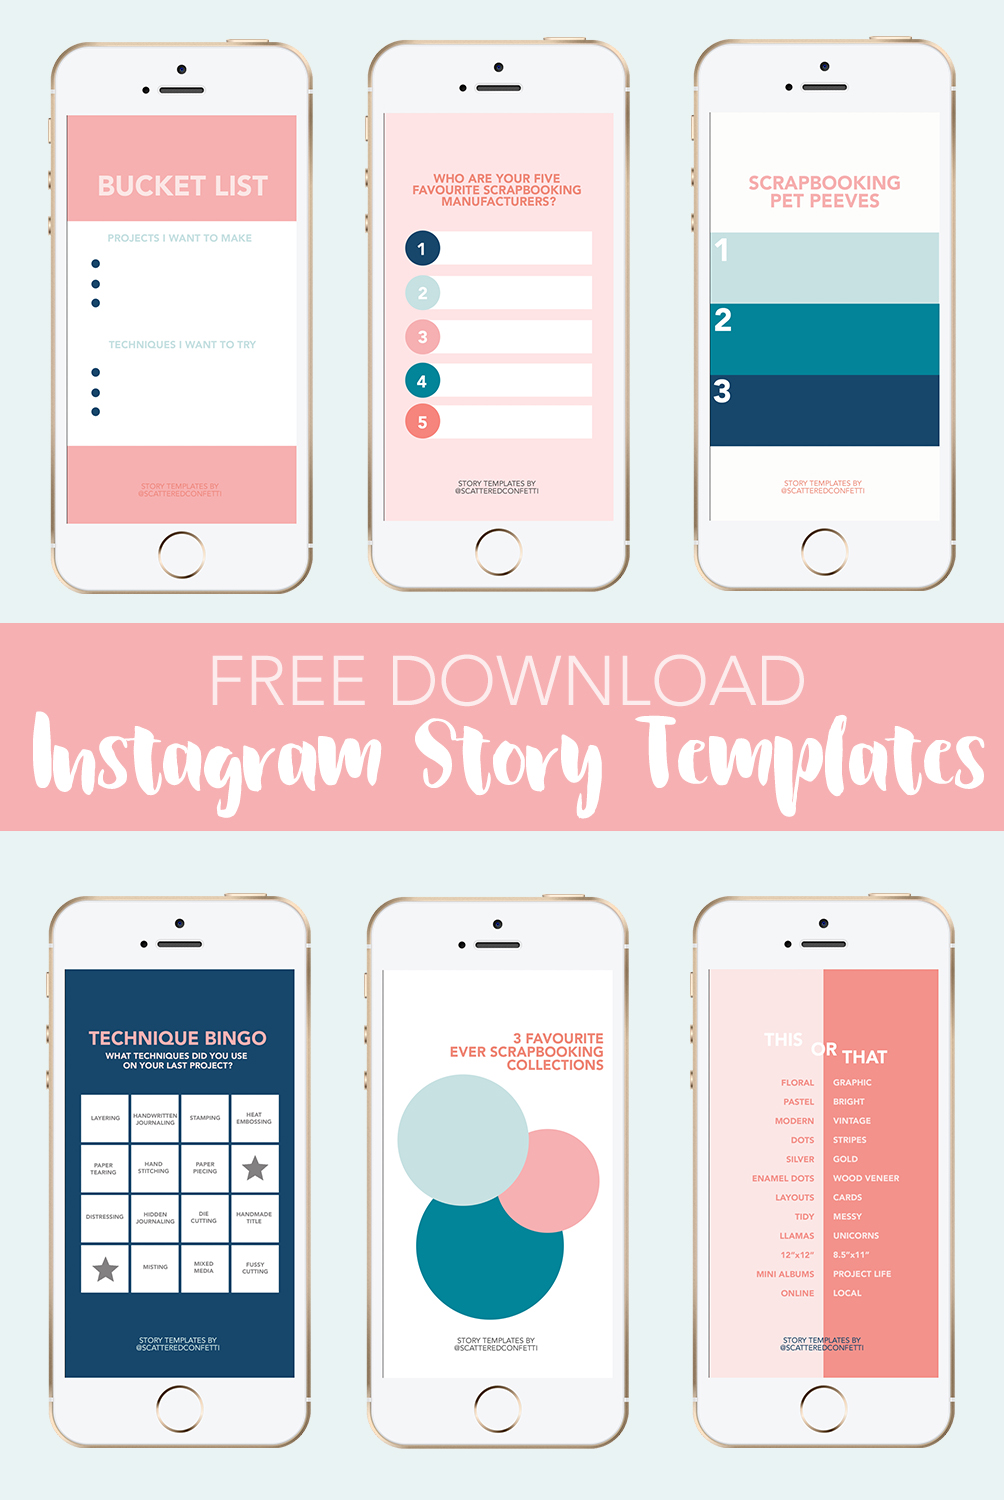 Free Download: Scrapbooking Instagram Story Templates by ScatteredConfetti.